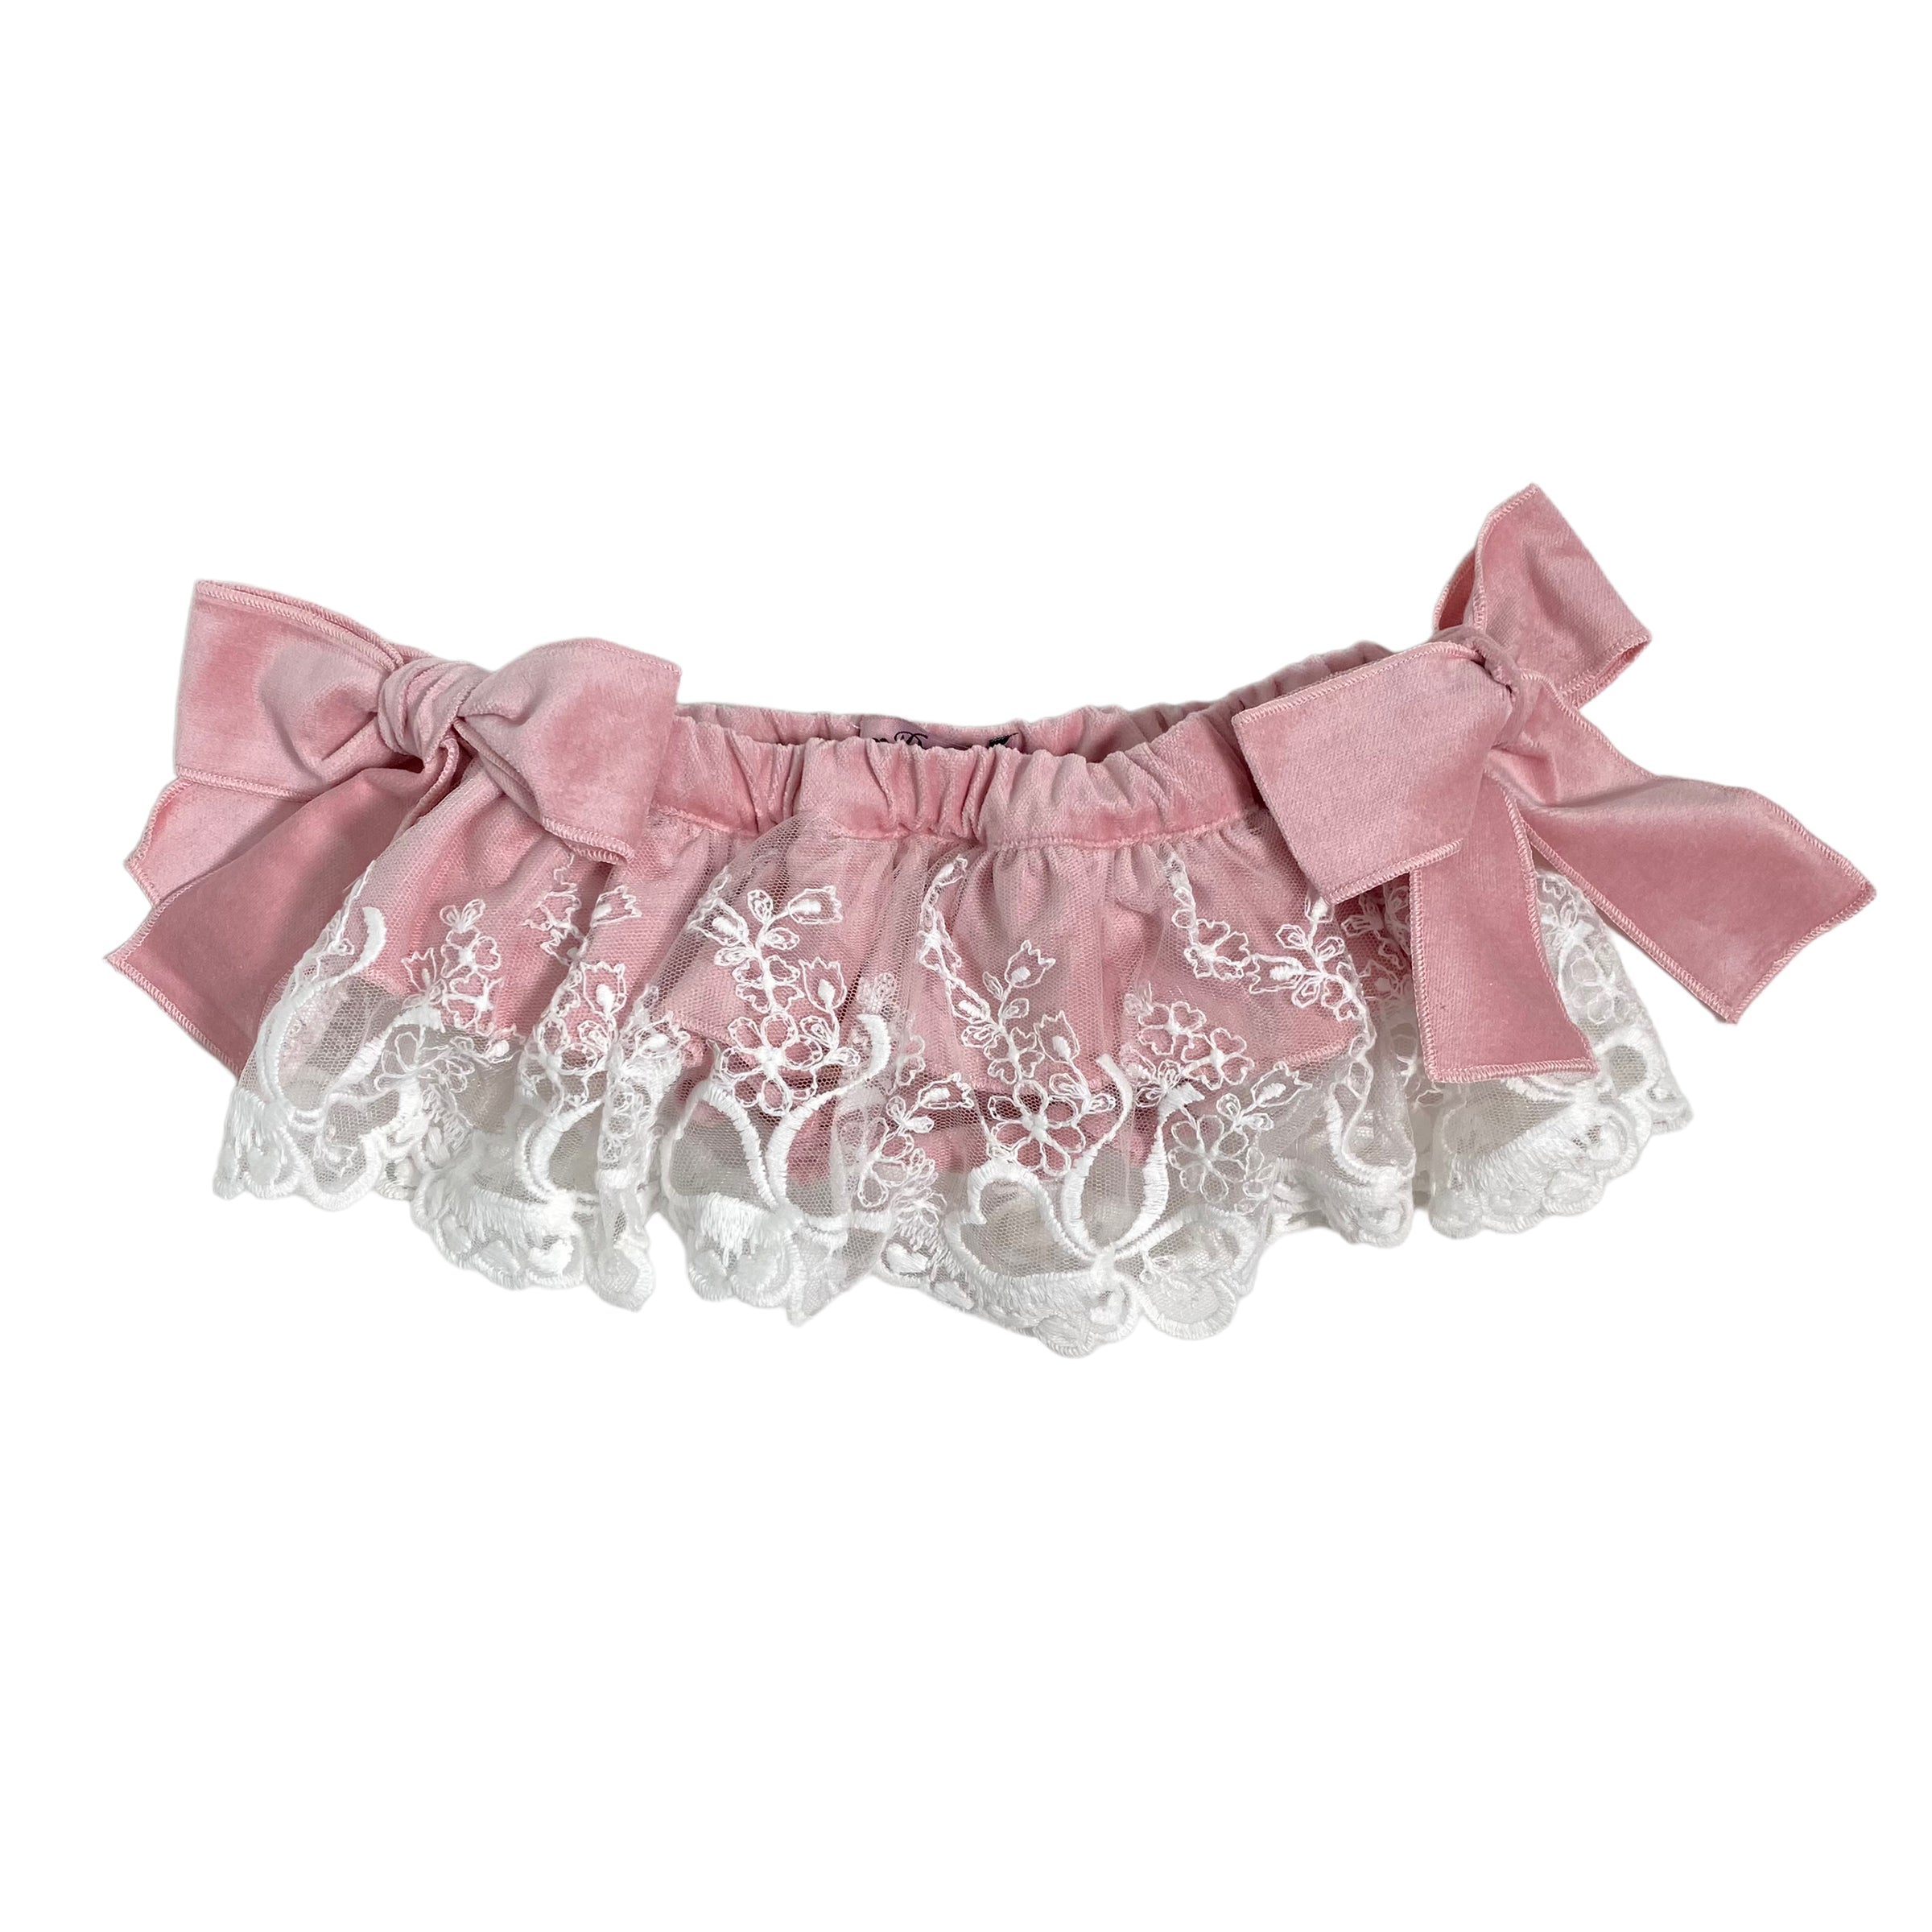 Culotte In Velluto Con Pizzo Rosa Bambina PHY CLOTHING 22519 - PHY CLOTHING - LuxuryKids